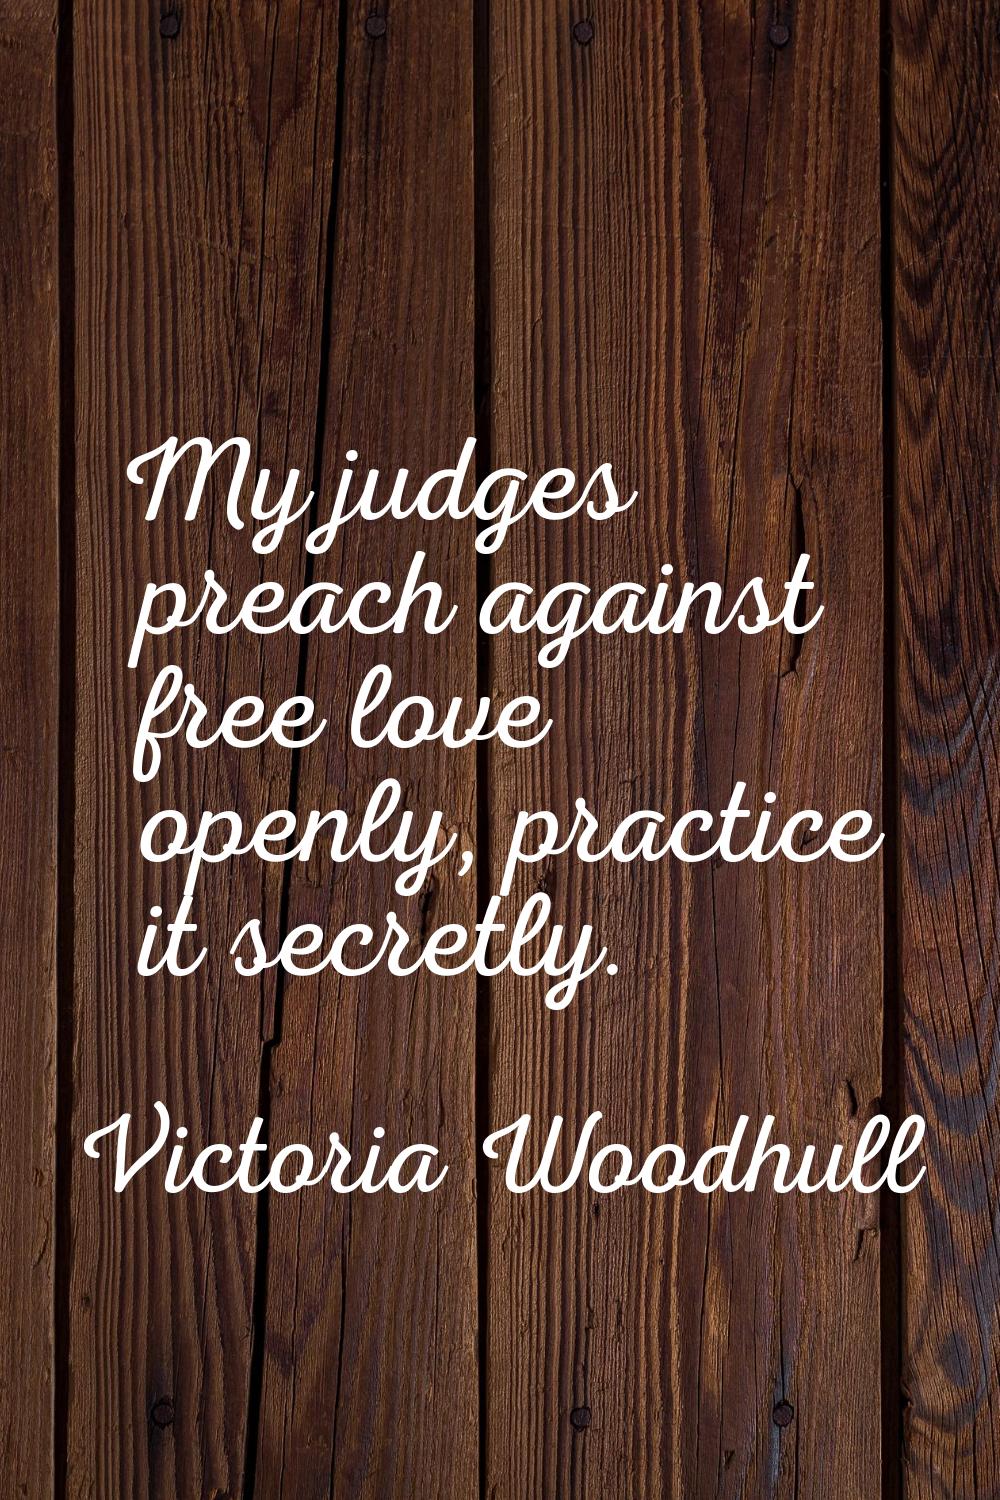 My judges preach against free love openly, practice it secretly.